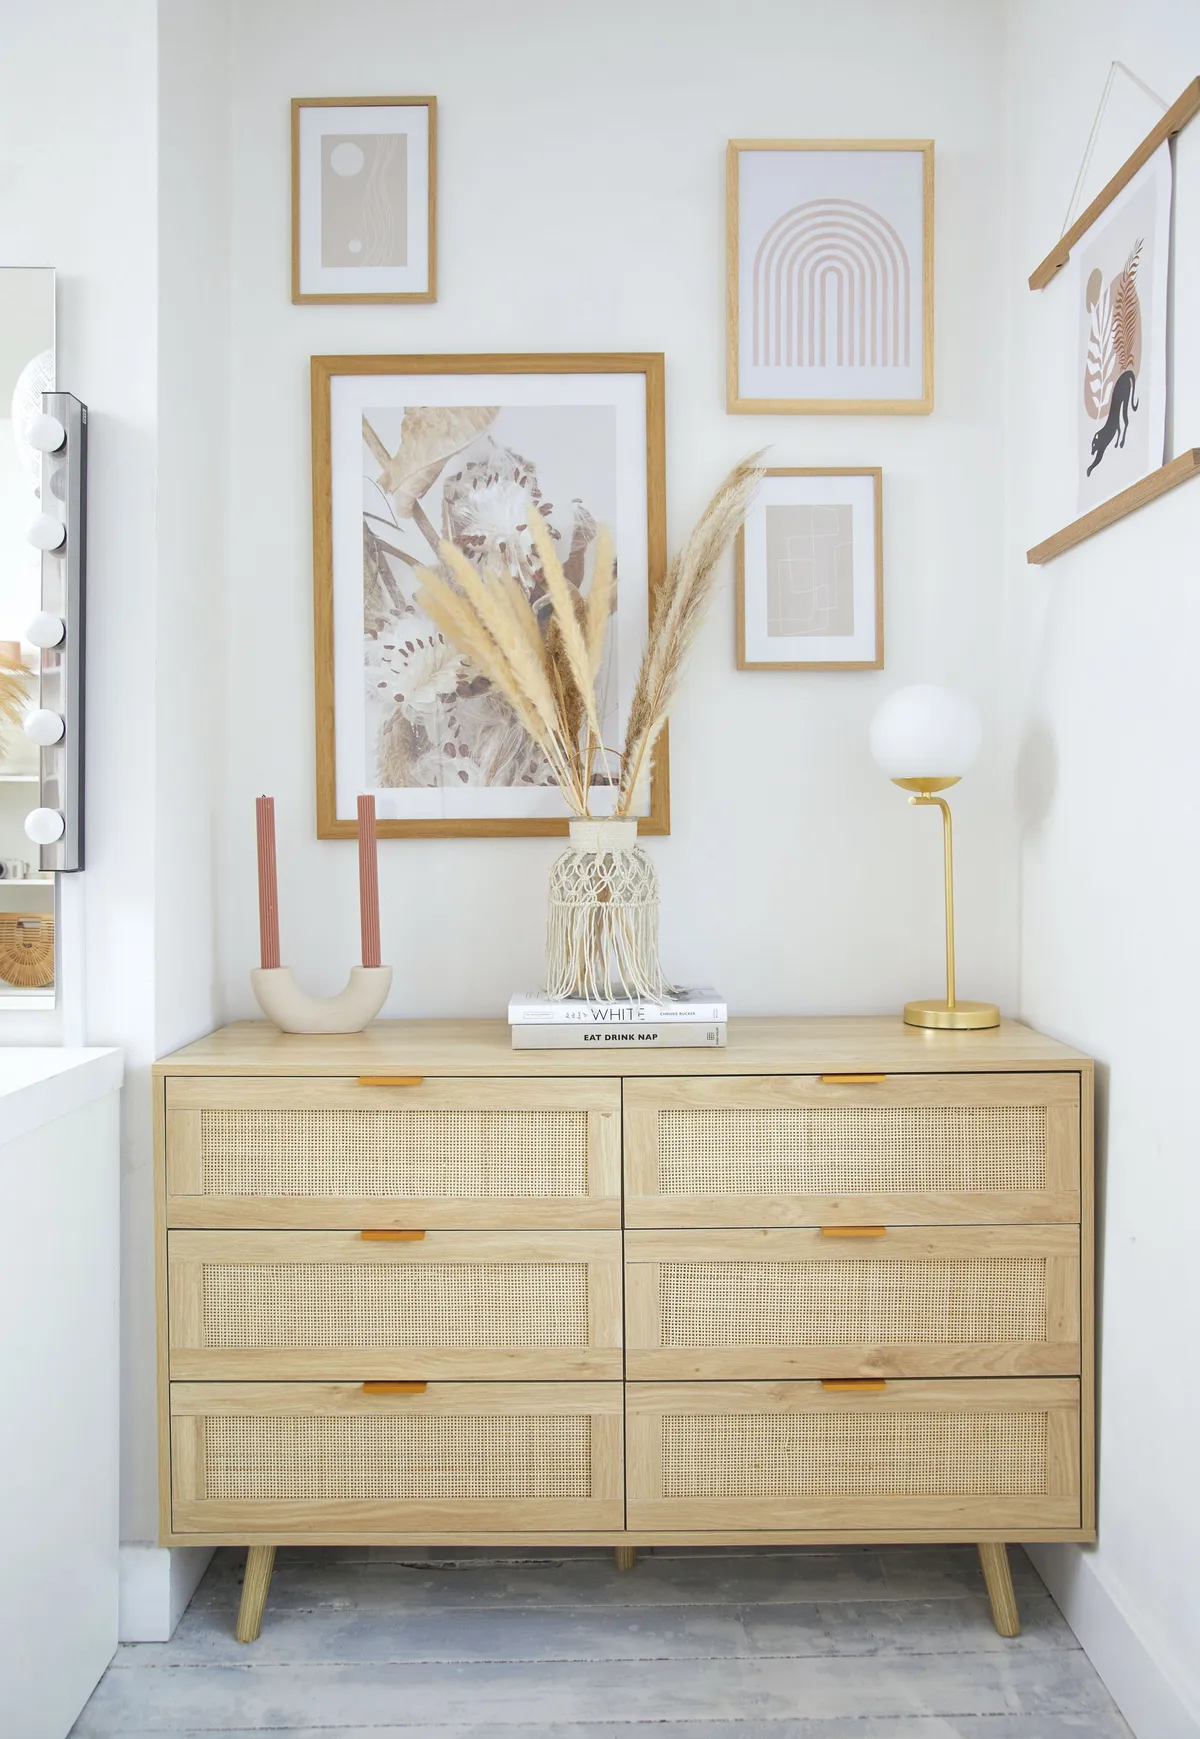 ‘I love a gallery wall and choose prints with colours that suit each room. I wanted light pink and neutral tones in here, and played around with scale for a less structured feel’